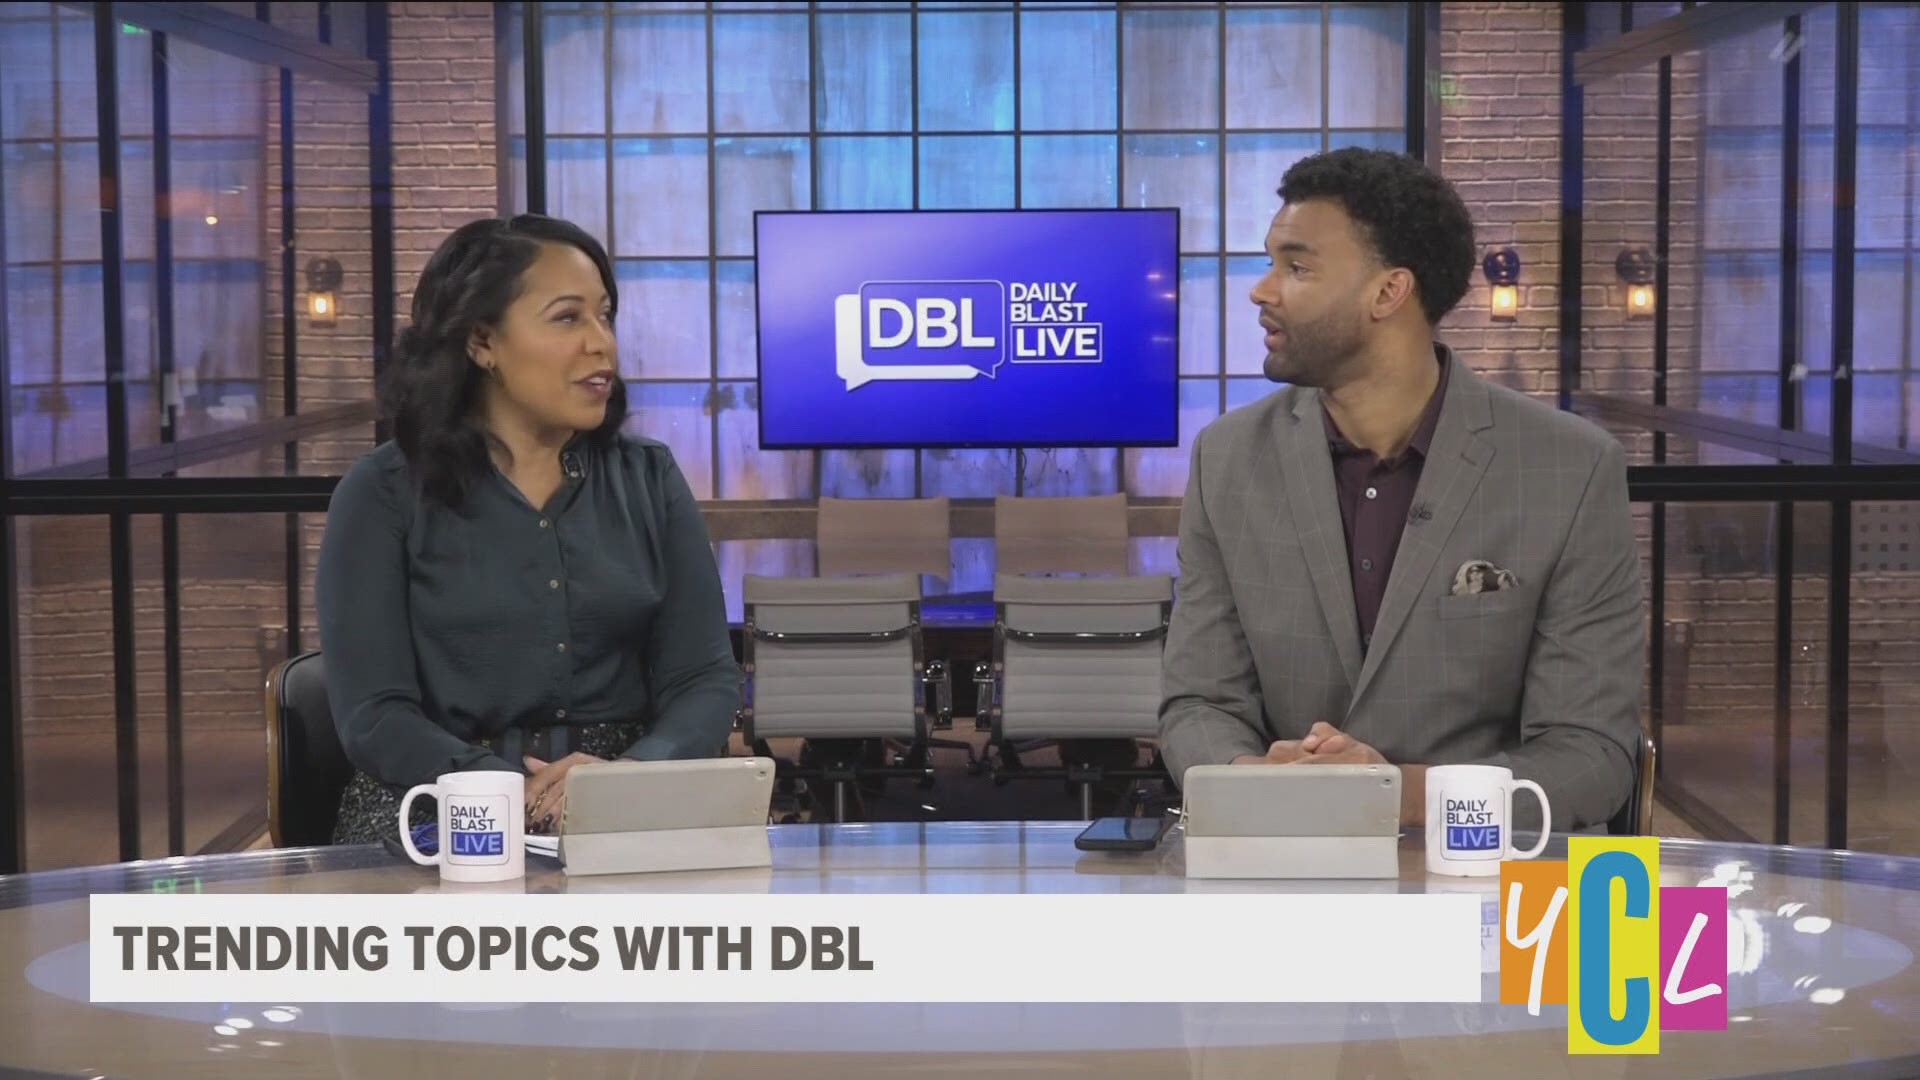 Keeping you in the know, we’re chatting with our friends at DBL!